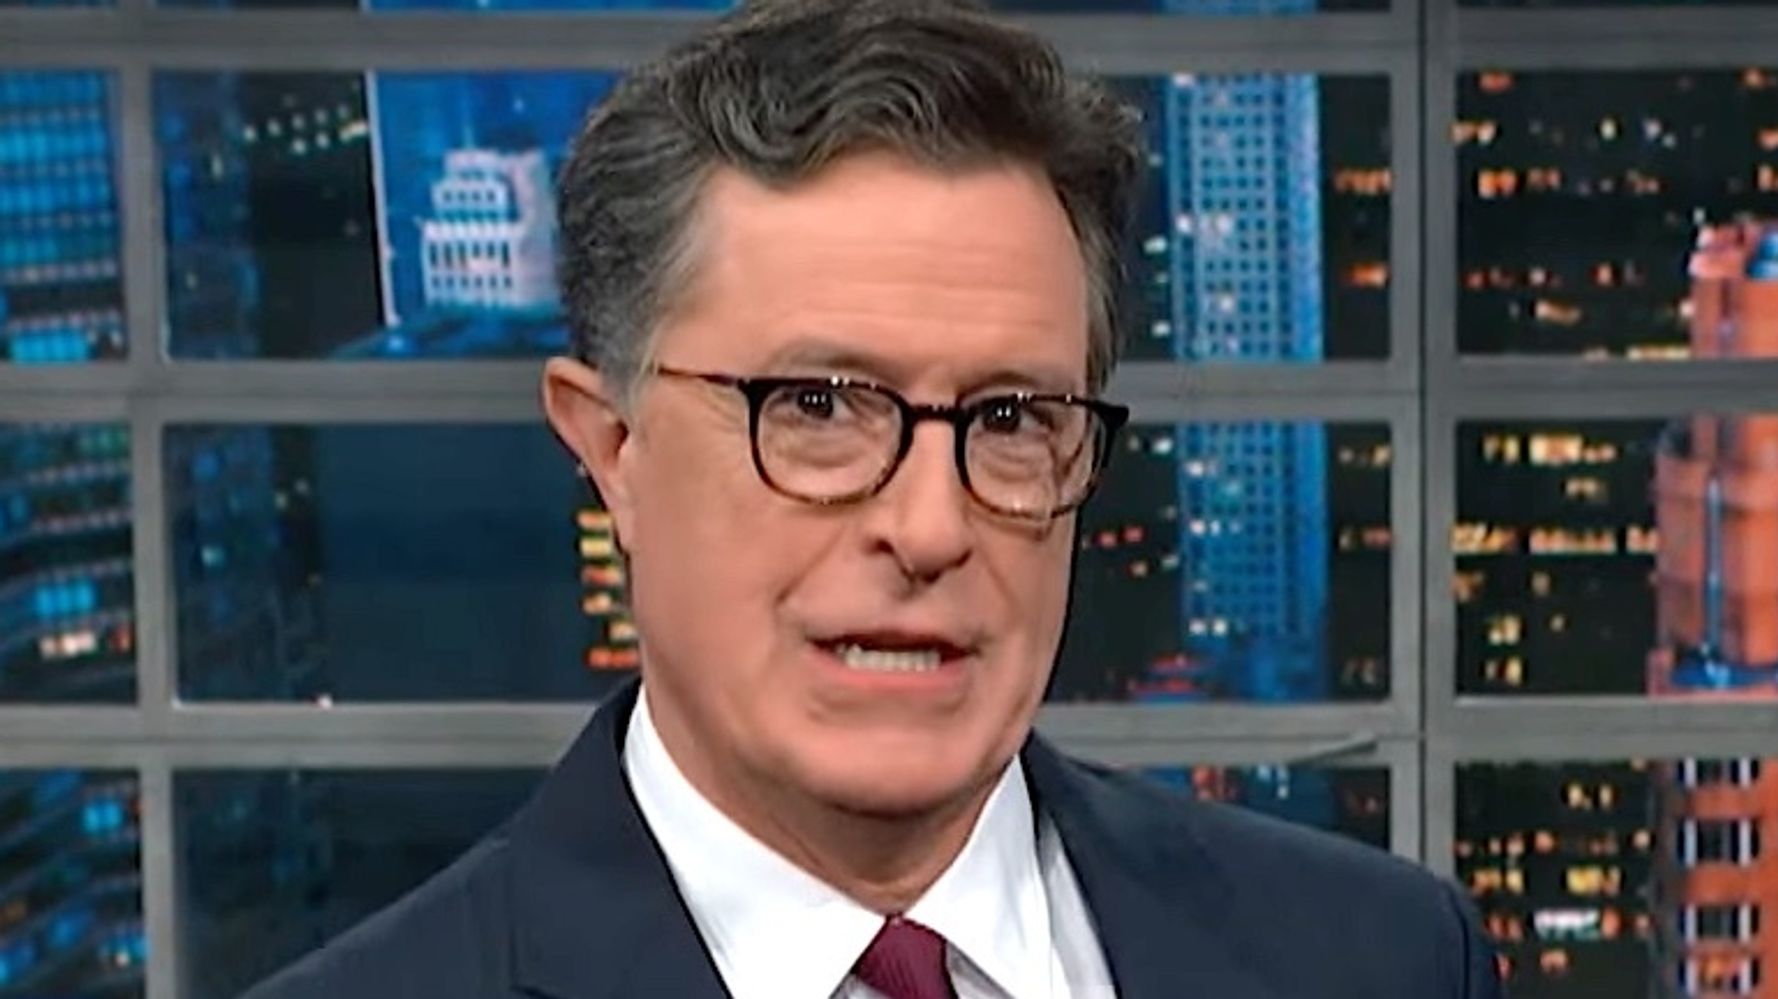 Fed-Up Colbert Spoils Juiciest Moments In Ex-Trump Aide's Book To Sabotage Sales